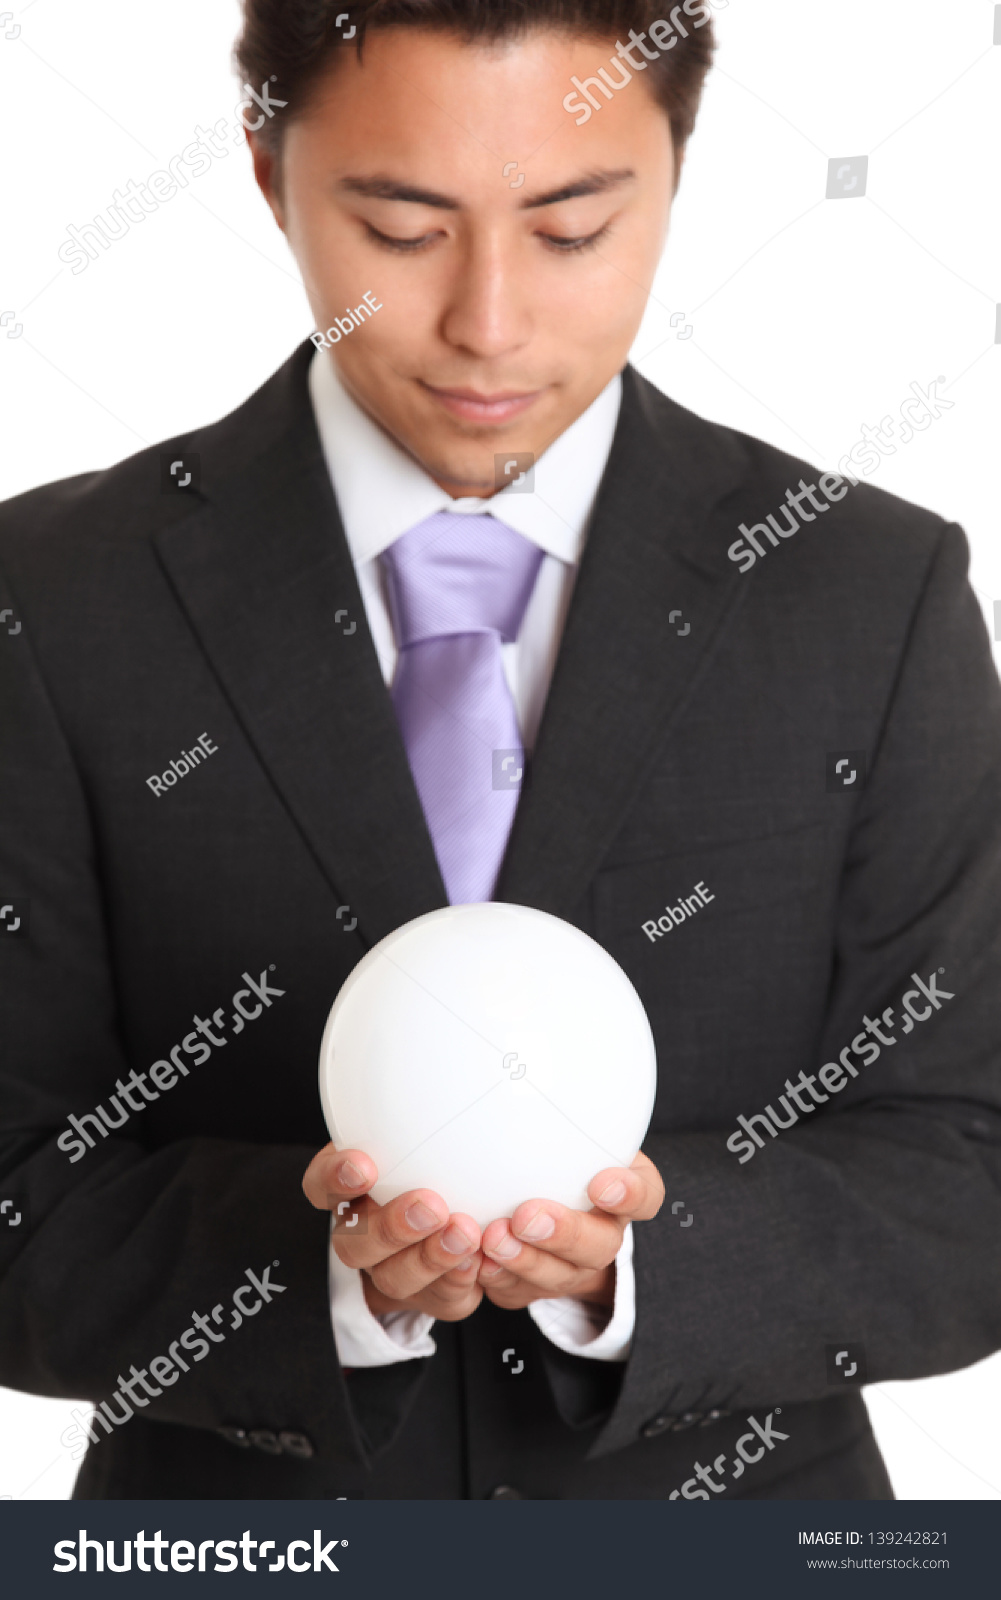 Businessman with a glass ball, looking in to the future. White background. #139242821